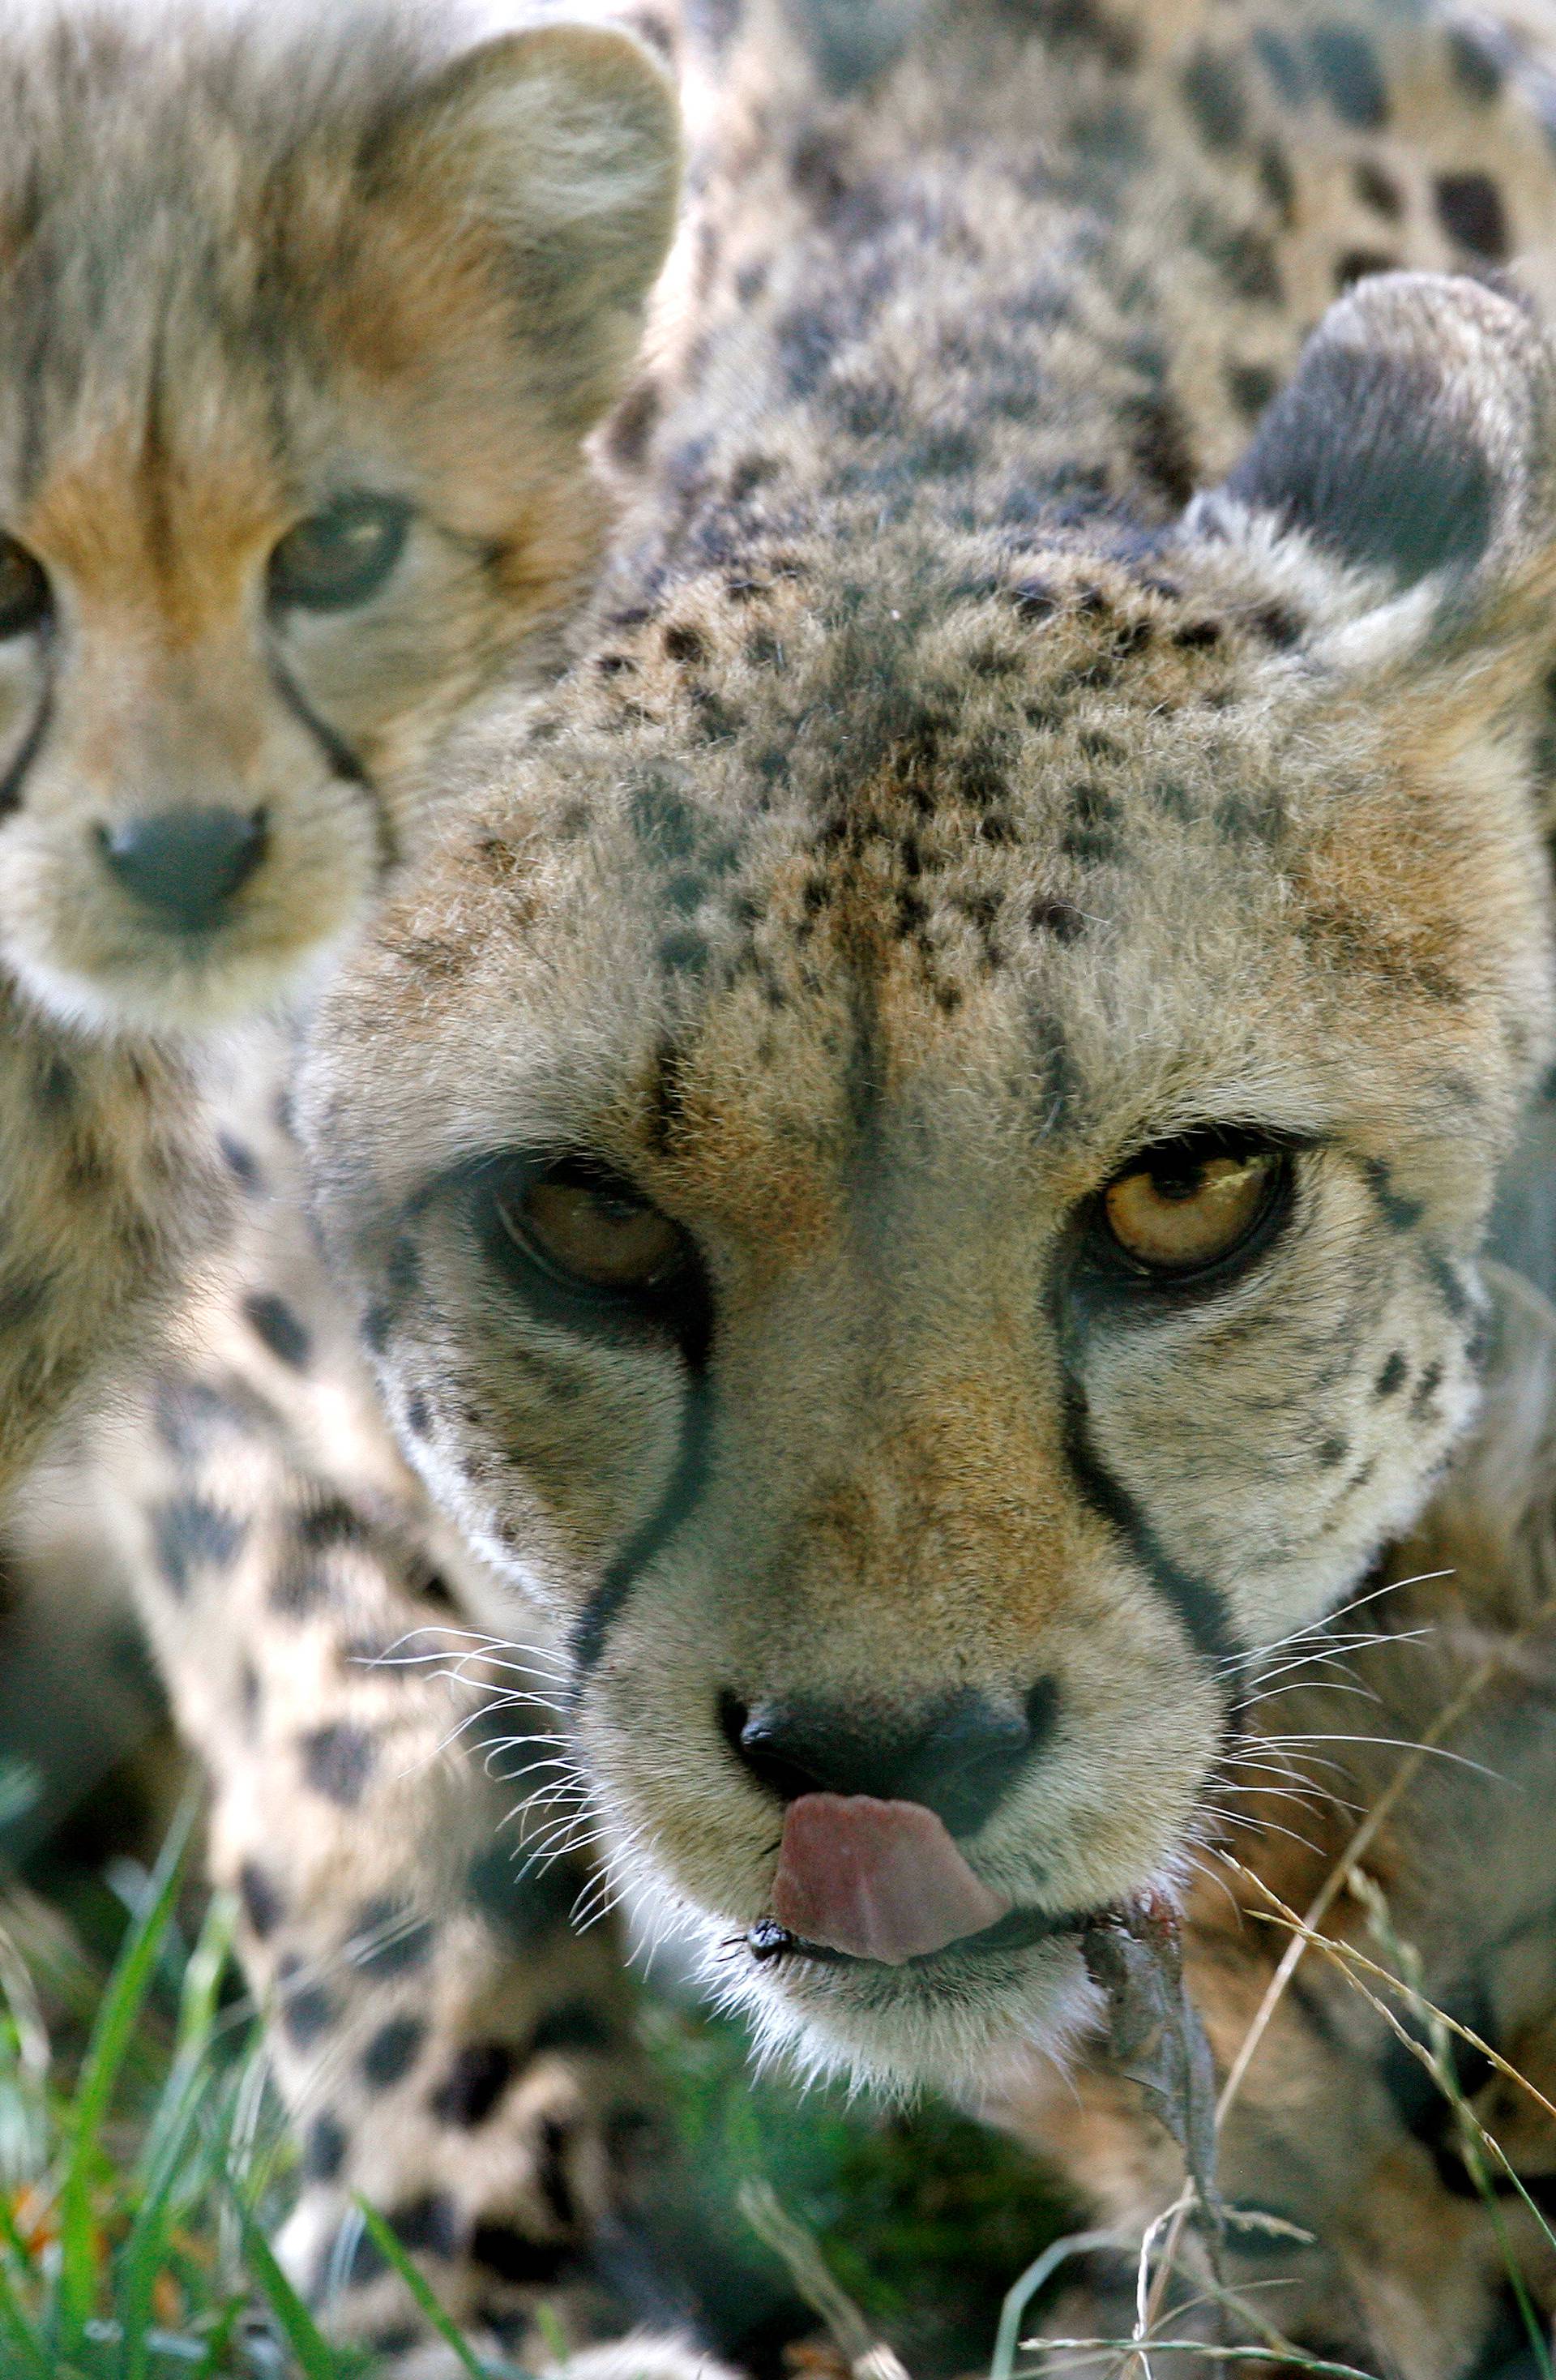 FILE PHOTO: Then ten-year-old cheetah Msichana standing beside one of its three cubs at an enclosure at the zoo in Basel